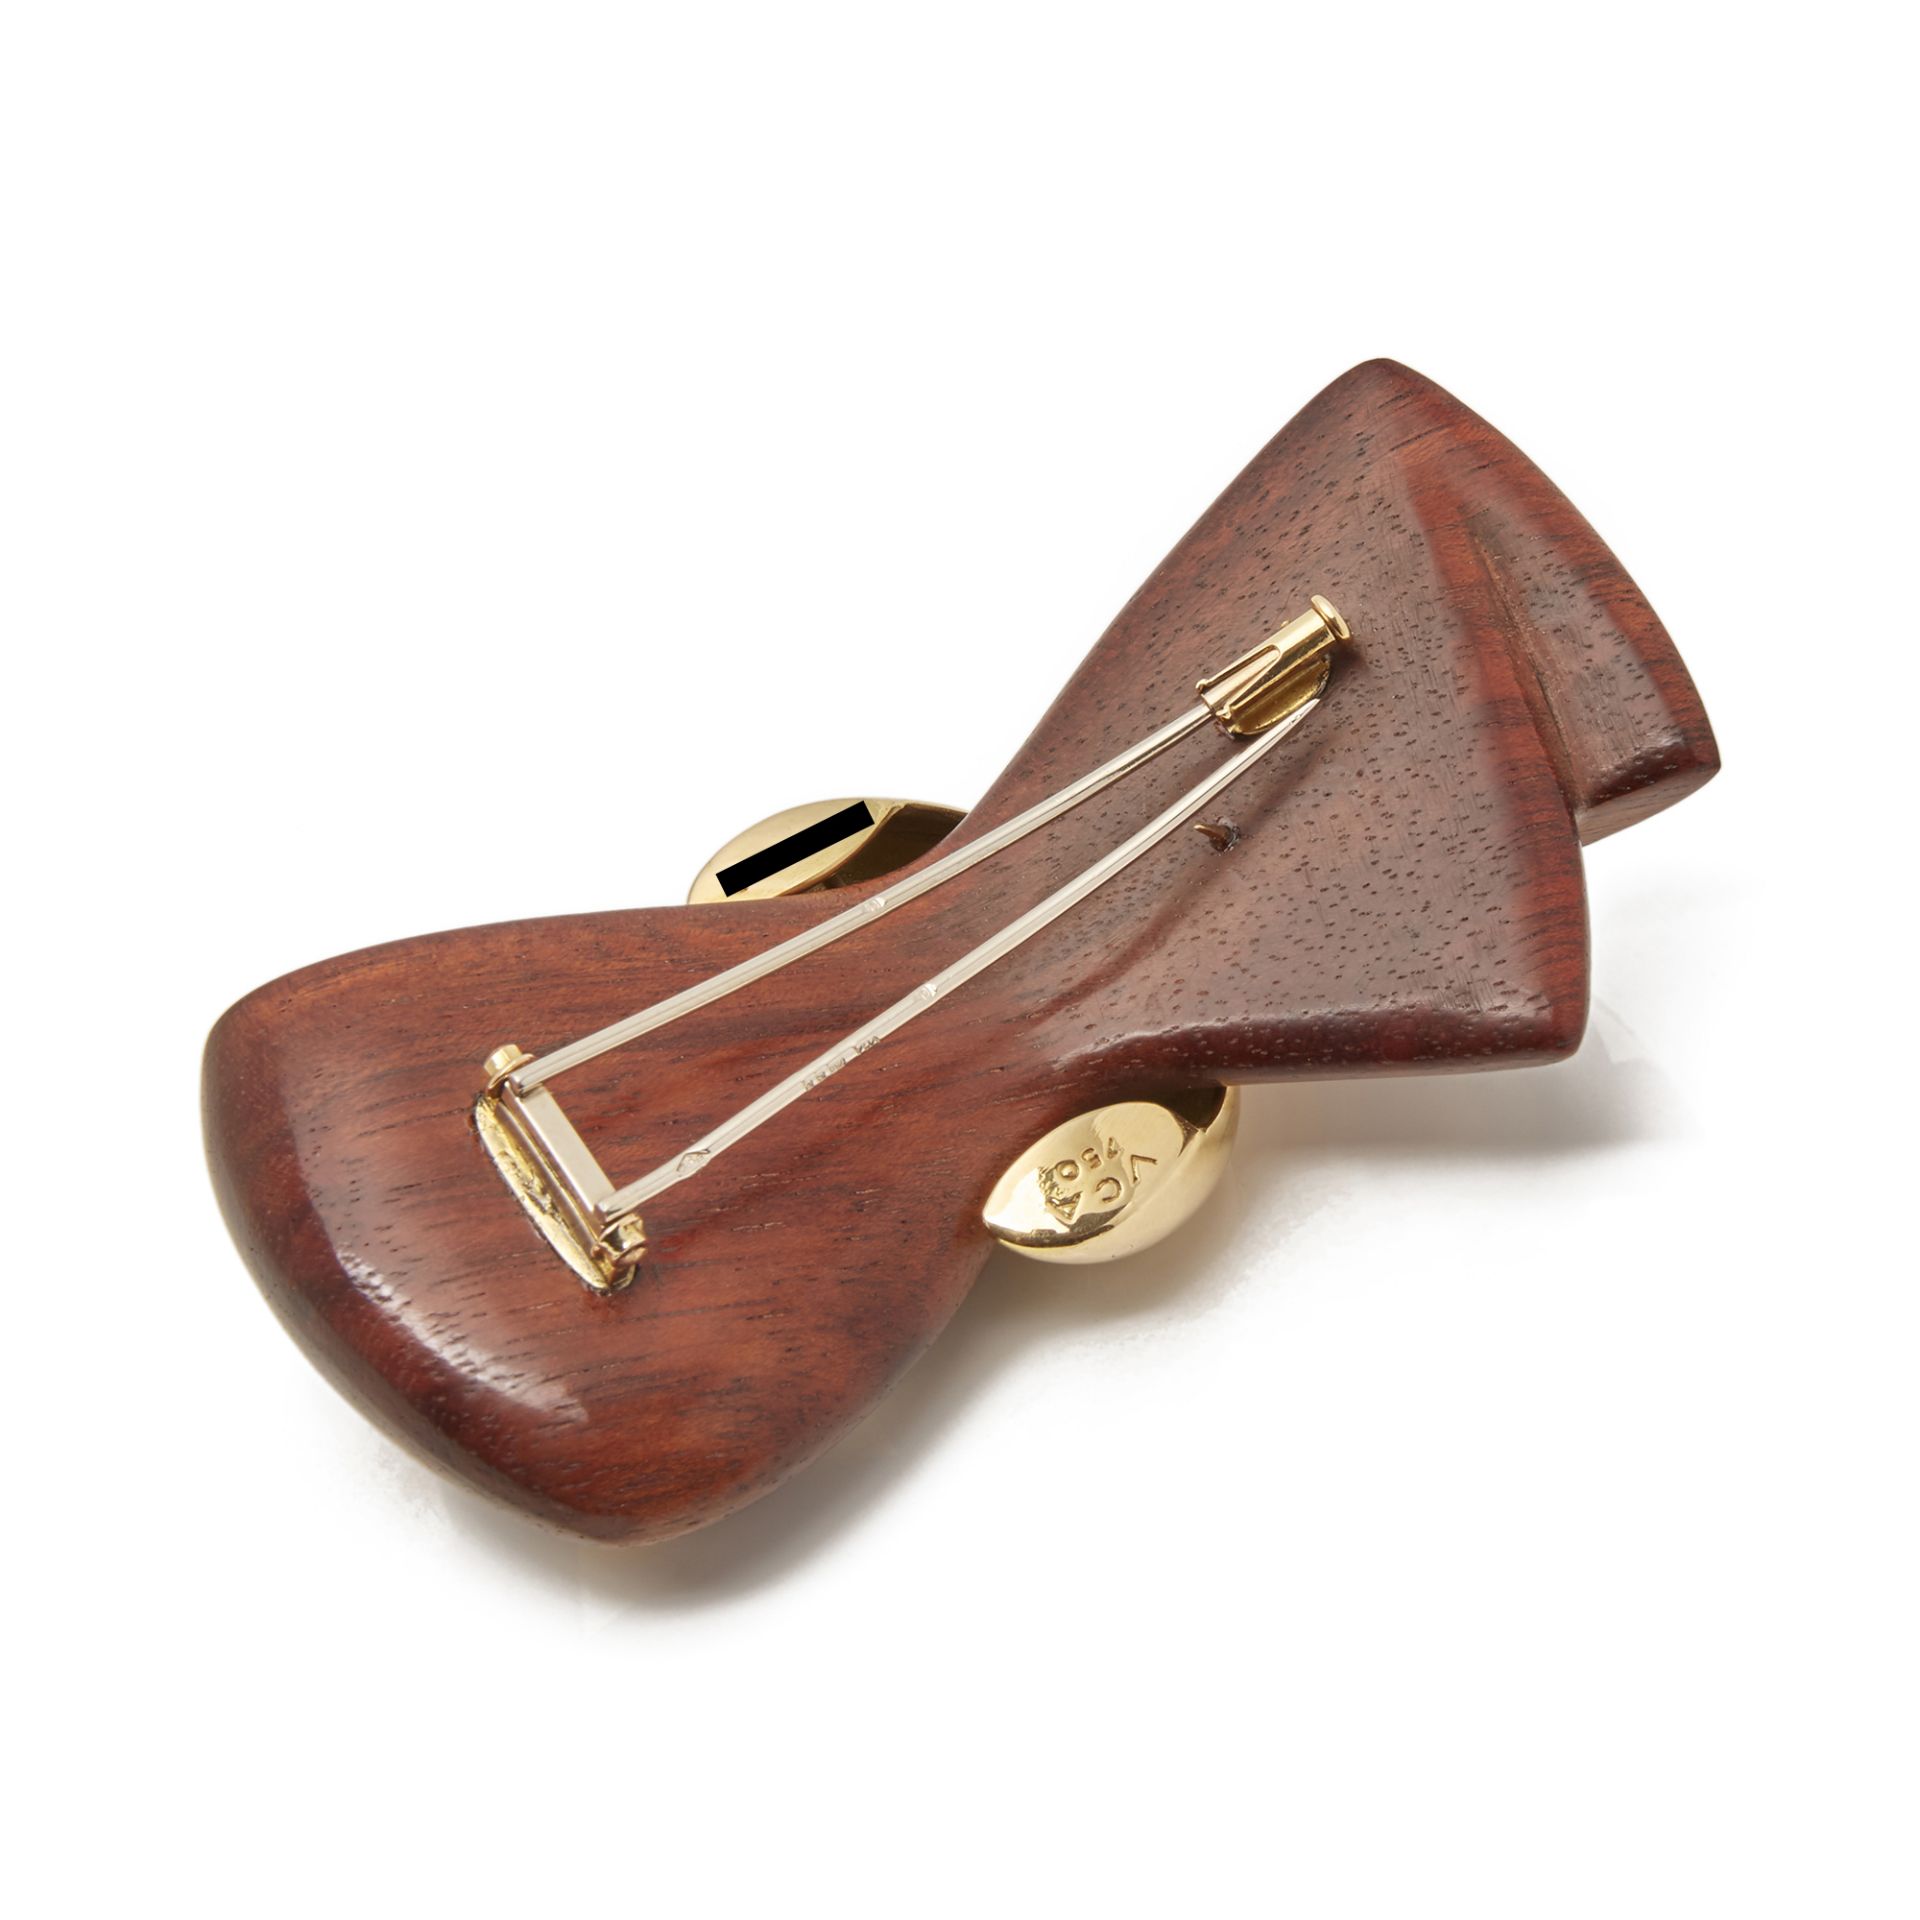 18k Yellow Gold & Wooden Vintage Bow Brooch - Image 7 of 7